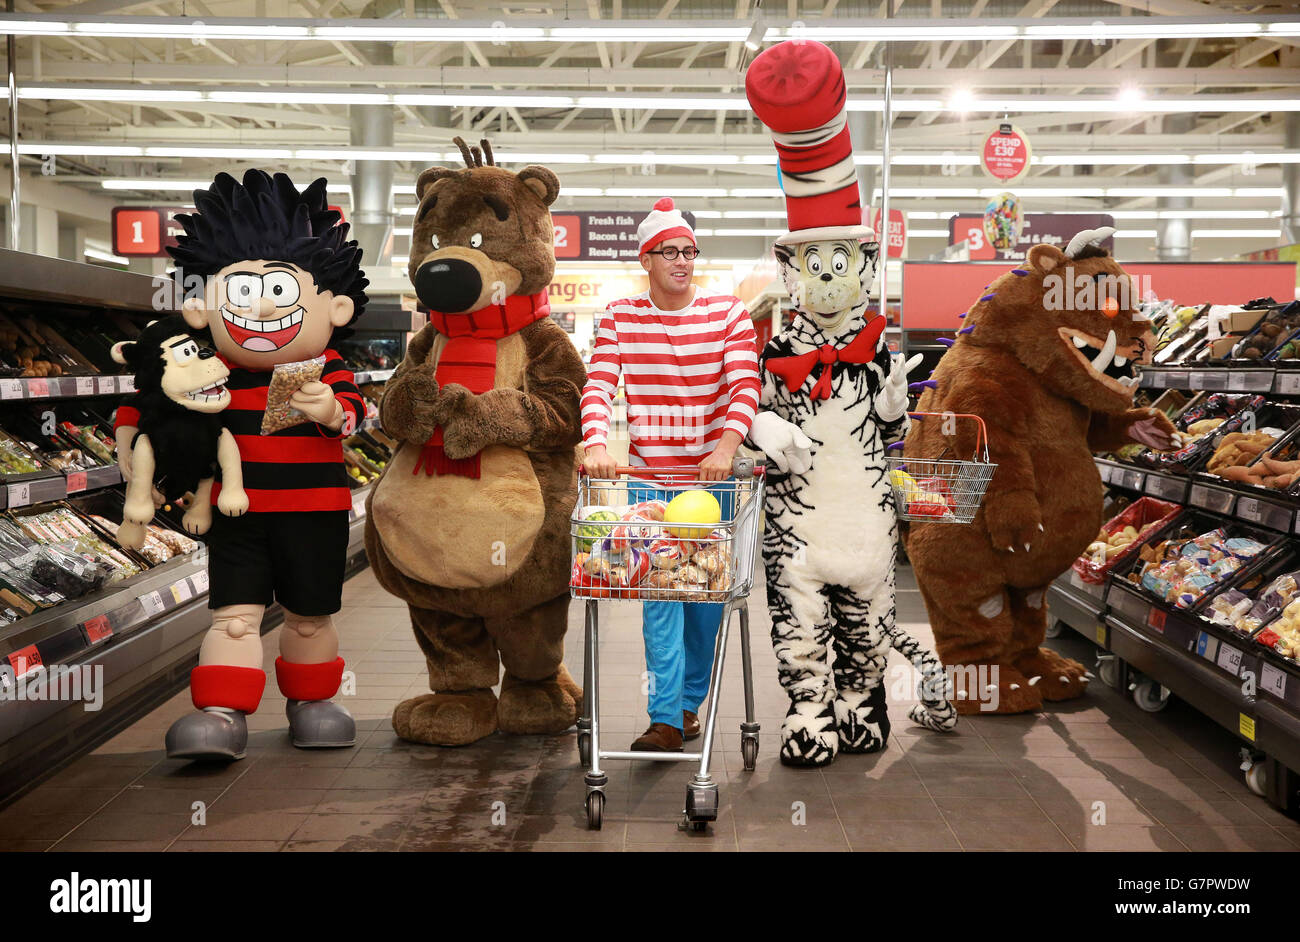 Well-known storybook characters (left to right) Dennis the Menace, Hugless Douglas, Where's Wally, Cat in the Hat and The Gruffalo visit the Sainsbury's store in Wandsworth, south west London, ahead of World Book Day, which is on Thursday 5 March. Stock Photo